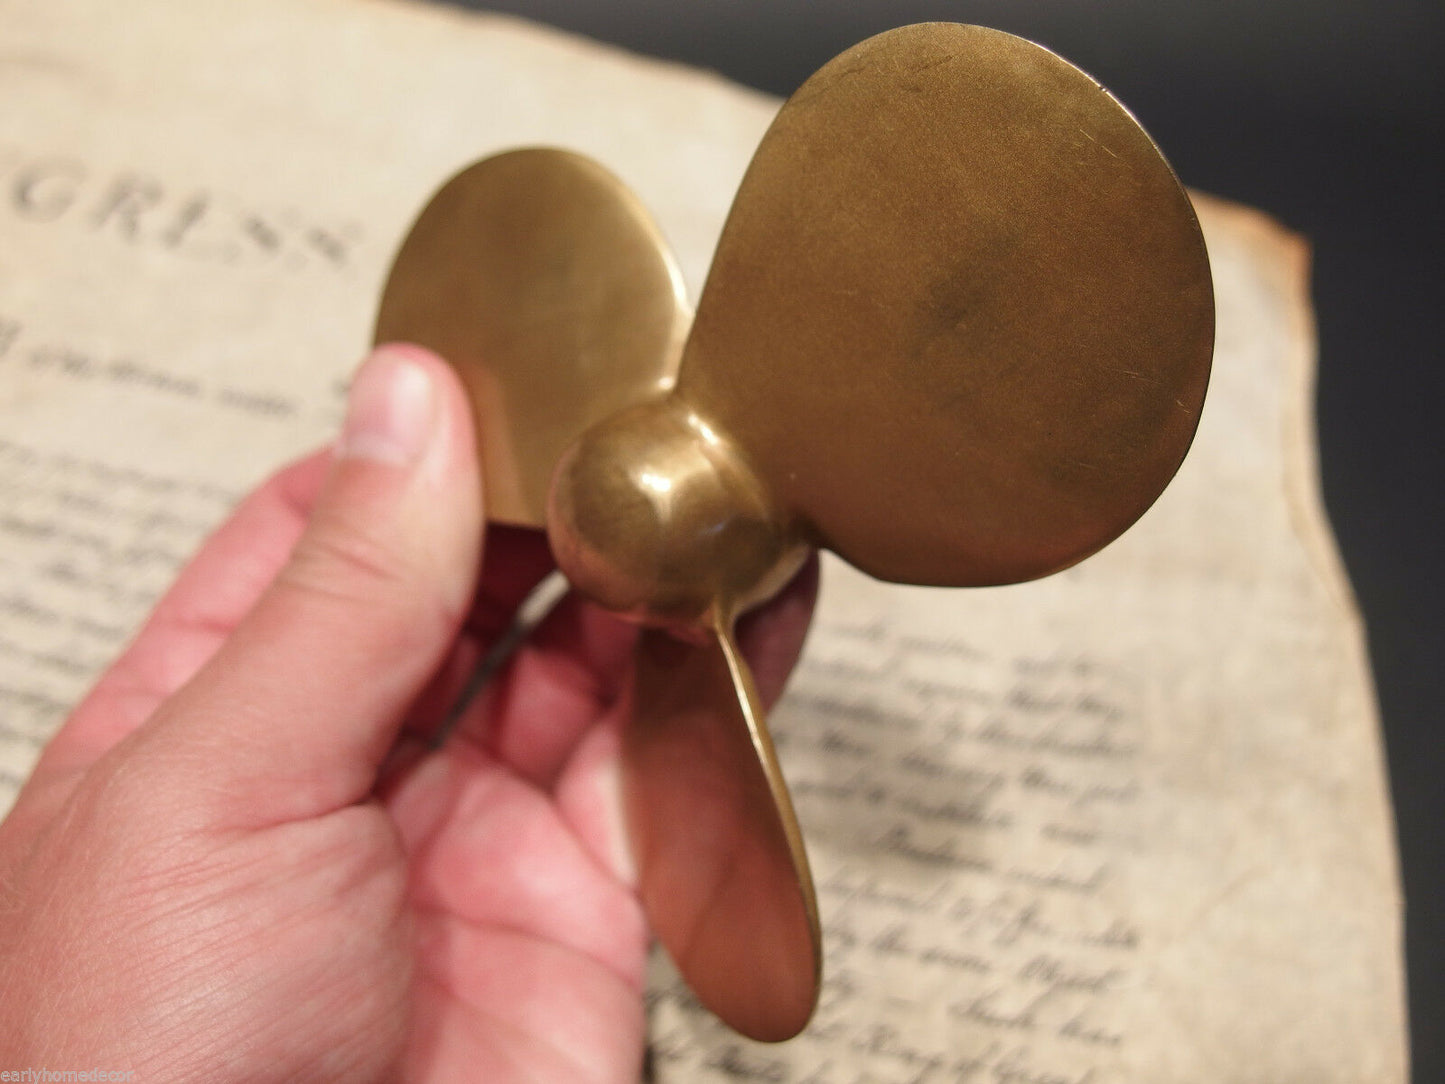 Vintage Antique Style Brass Nautical Boat Propeller Paperweight Desk Figure - Early Home Decor